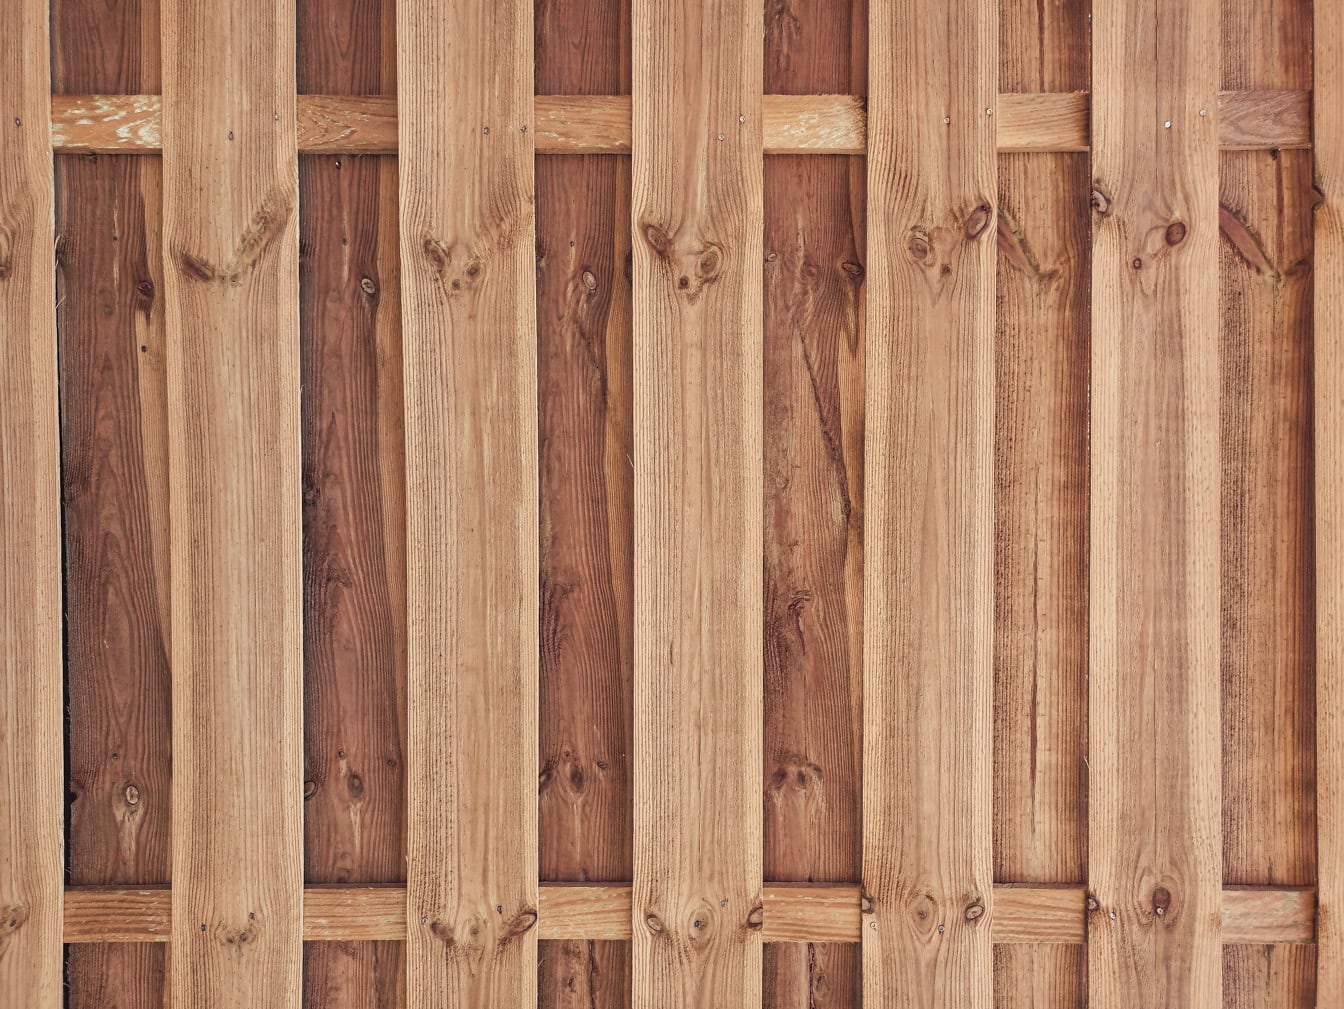 A lumber panel made out of vertically stacked hardwood slats in a form of picket fence with background made of planks with knots